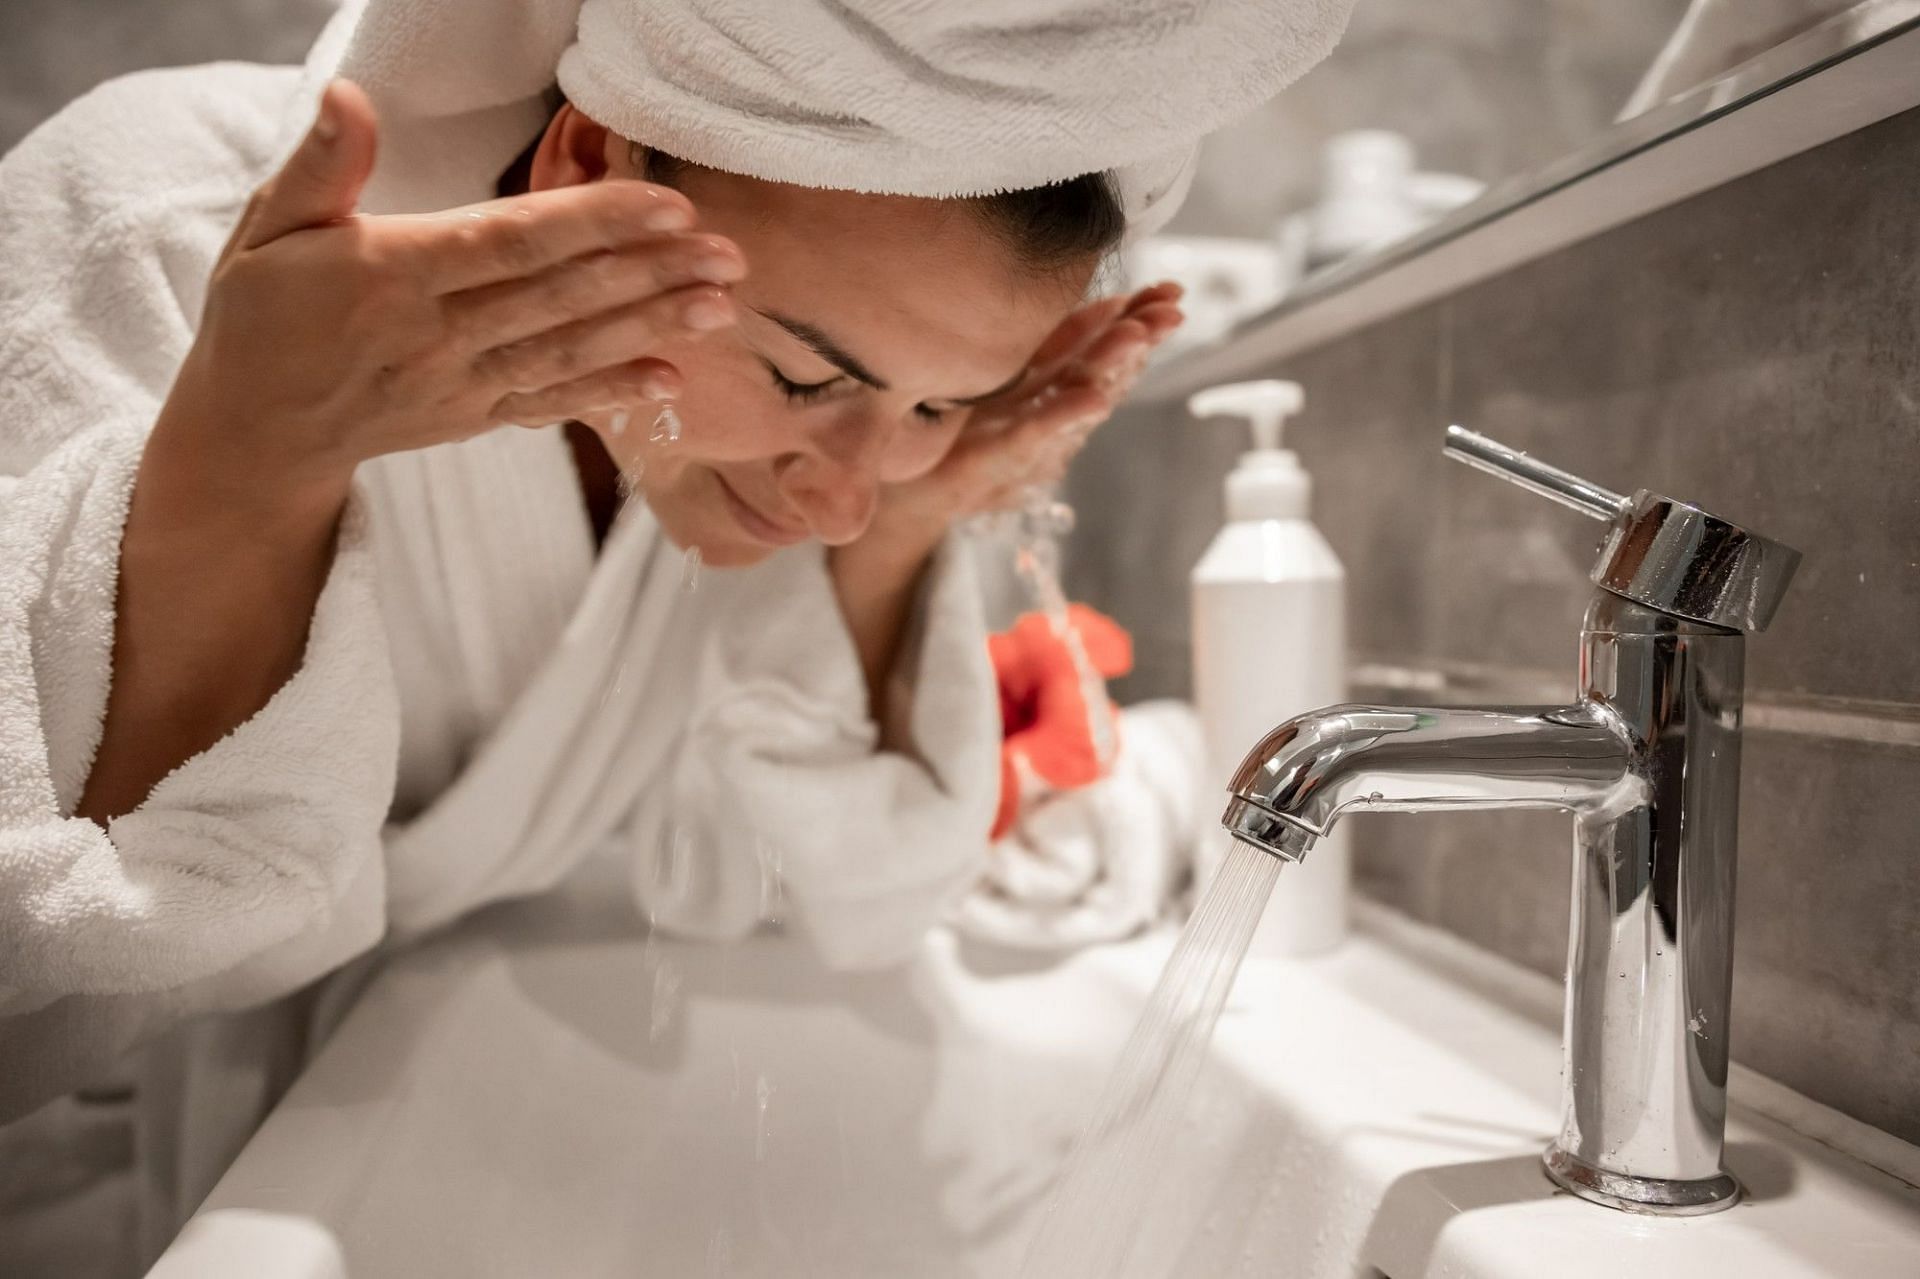 How often should I wash my face? (Image by pvproductions on Freepik)